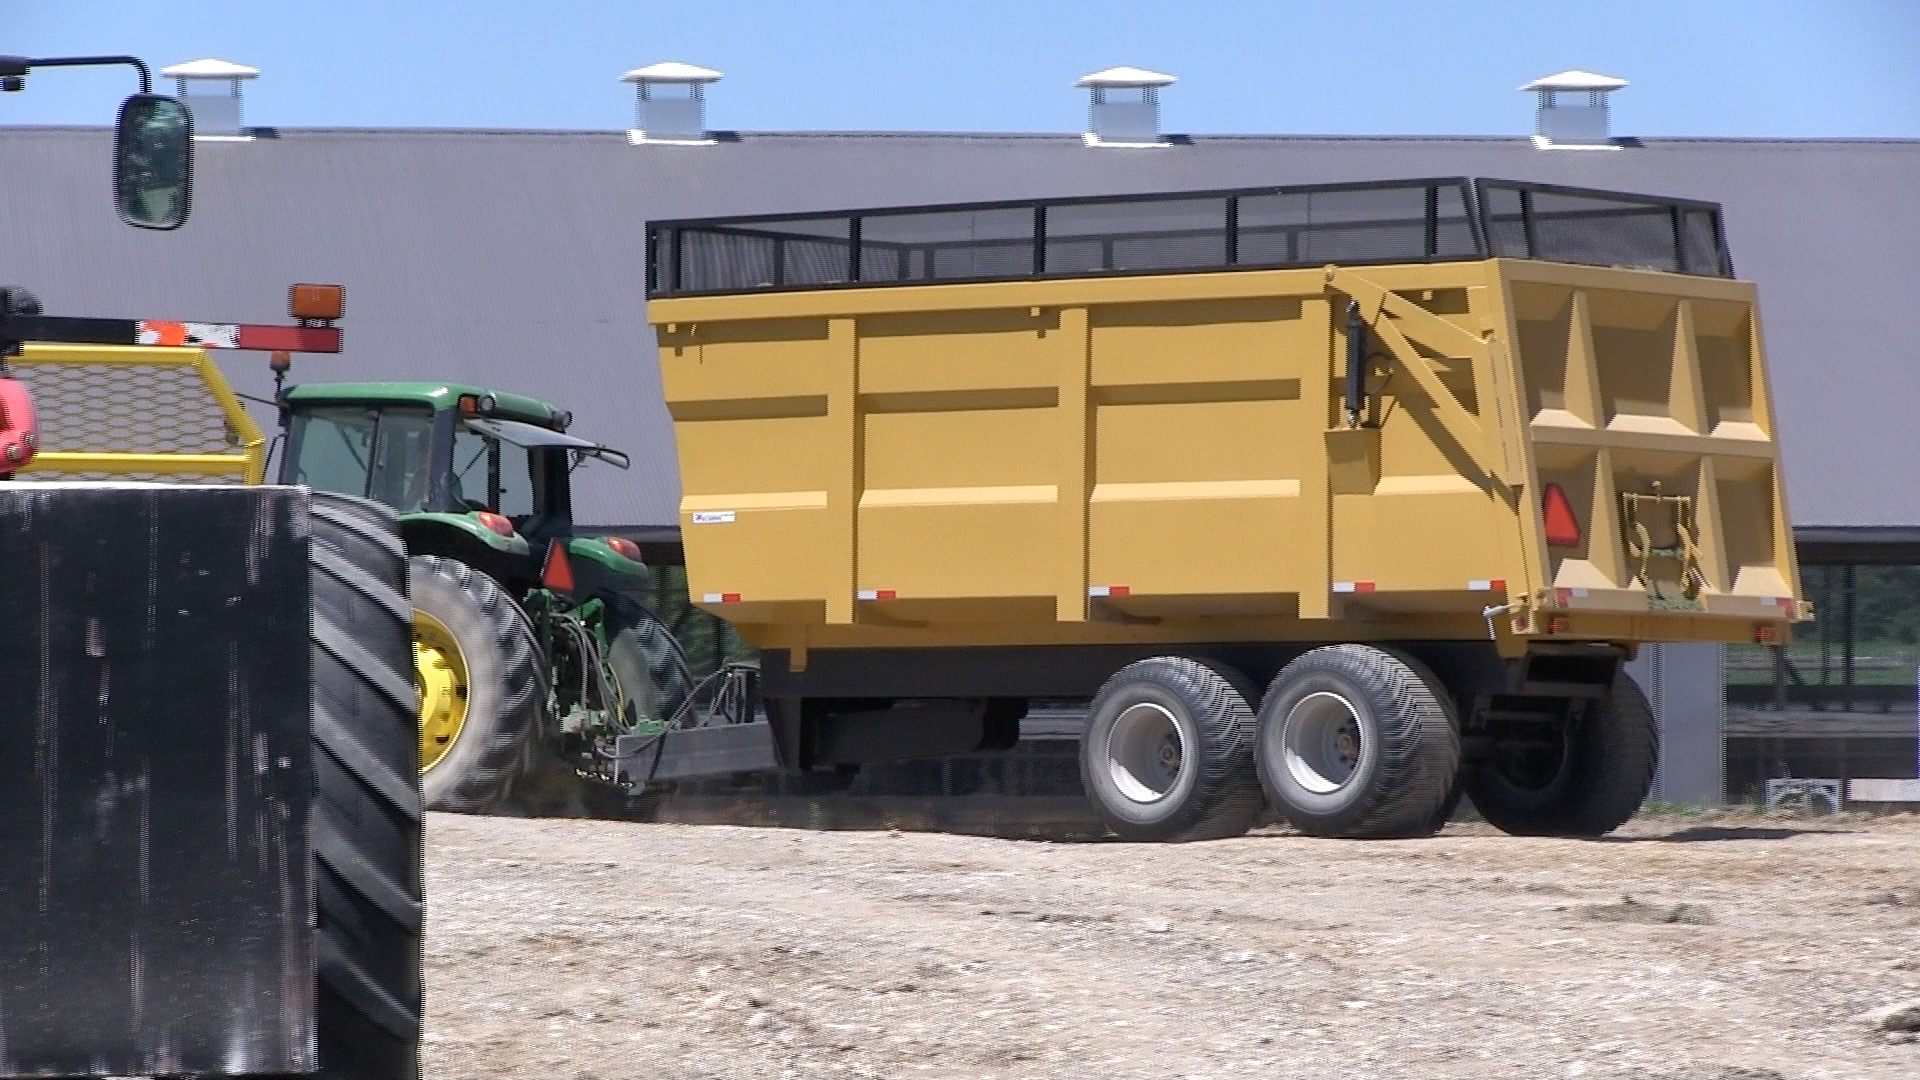 An image of the 20 ton silage dump trailer